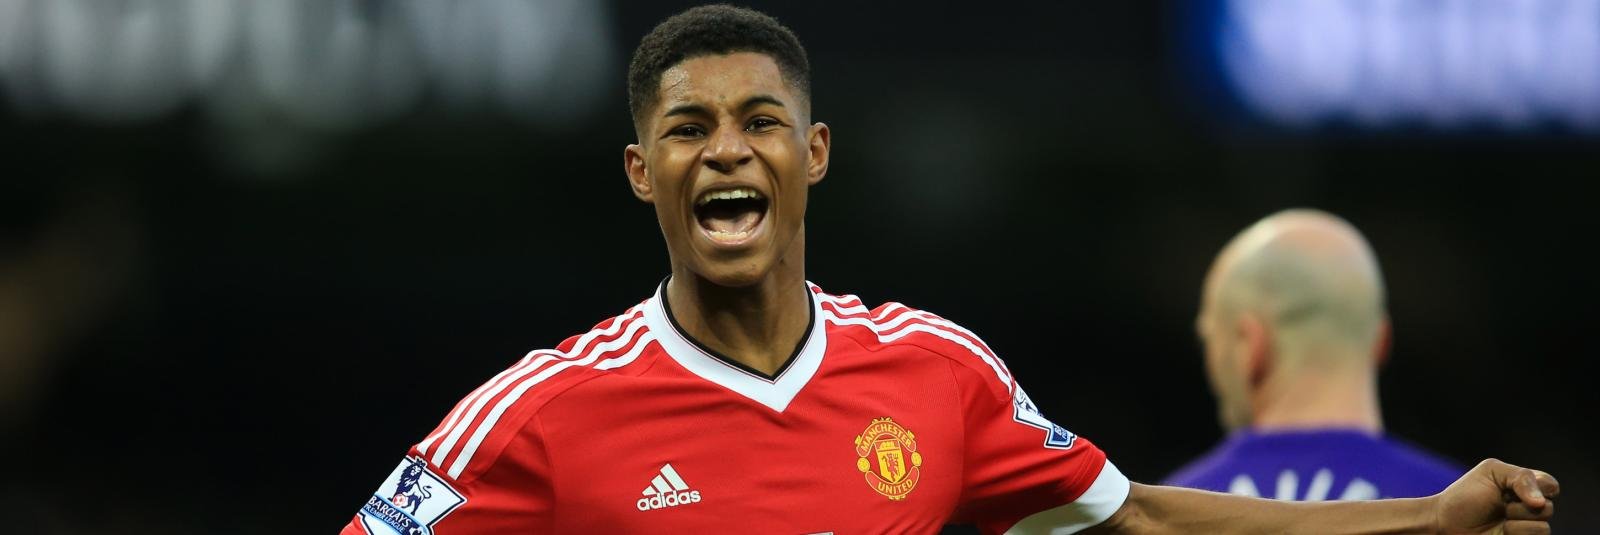 Marcus Rashford signs new £20,000-a-week contract at Manchester United